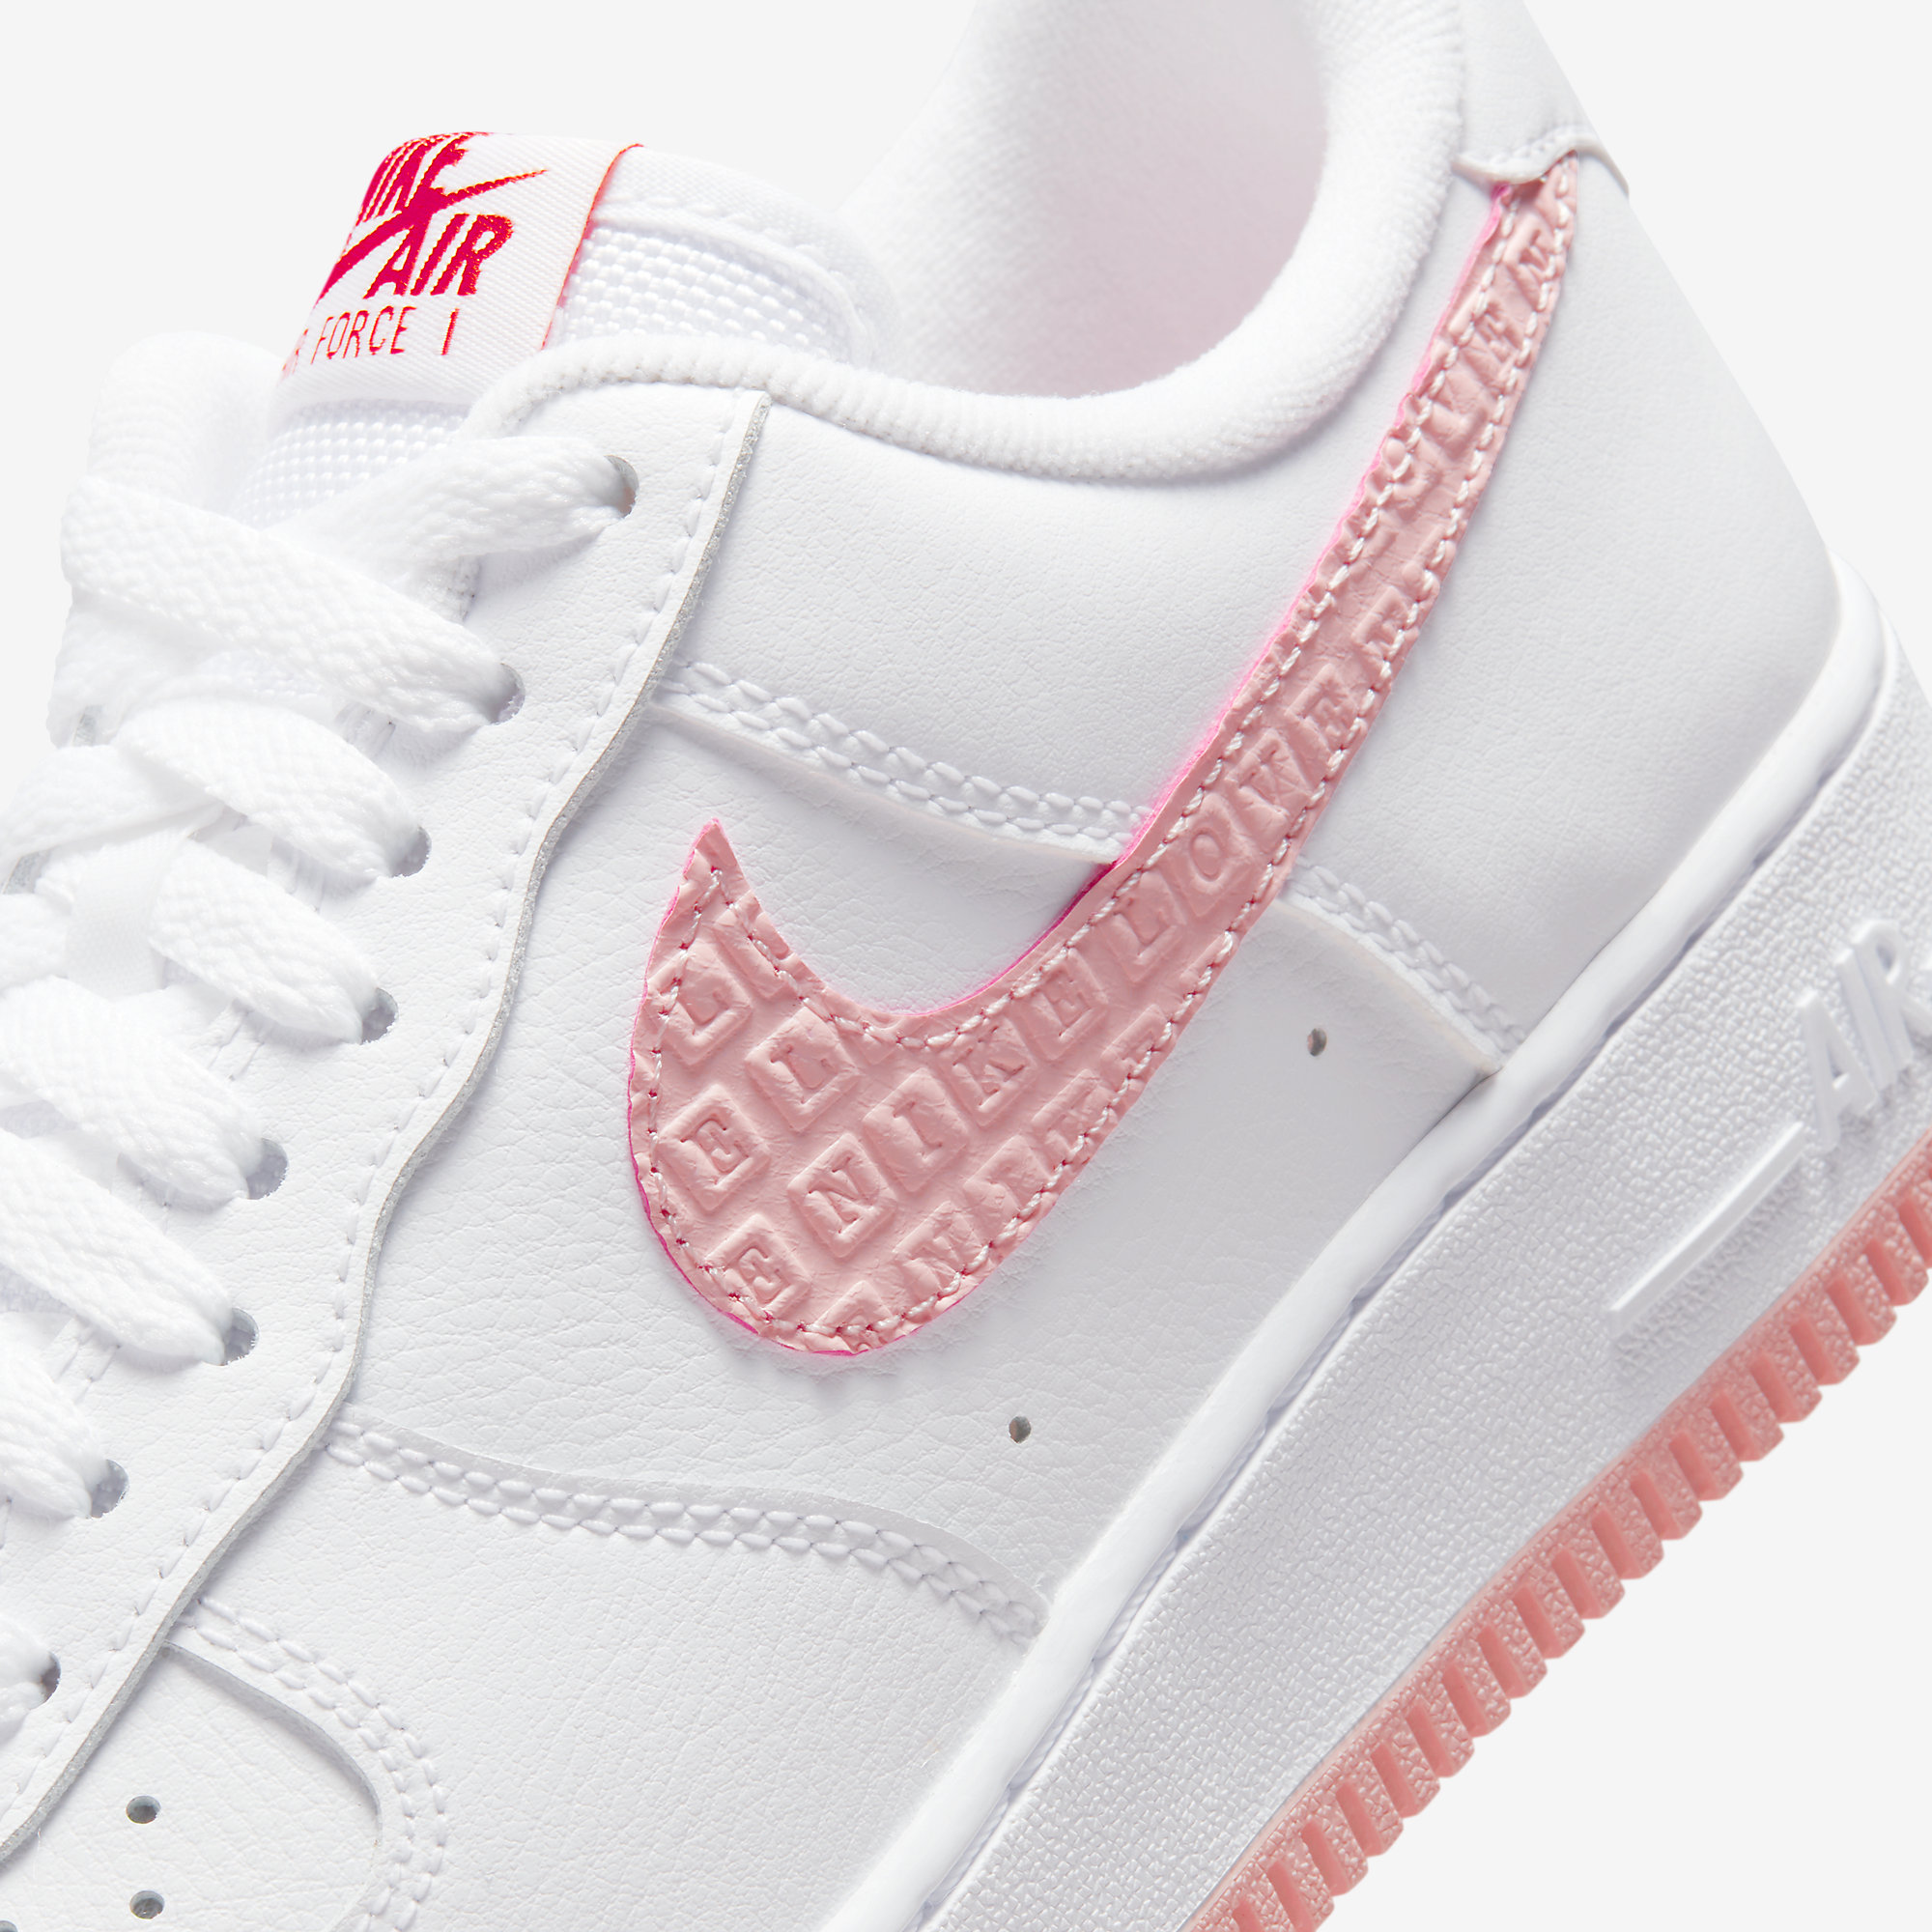 GIÀY NỮ NIKE AIR FORCE 1 07 LOW VD VALENTINE S DAY WHITE ATMOSPHERE UNIVERSITY RED SAIL DQ9320-100 17